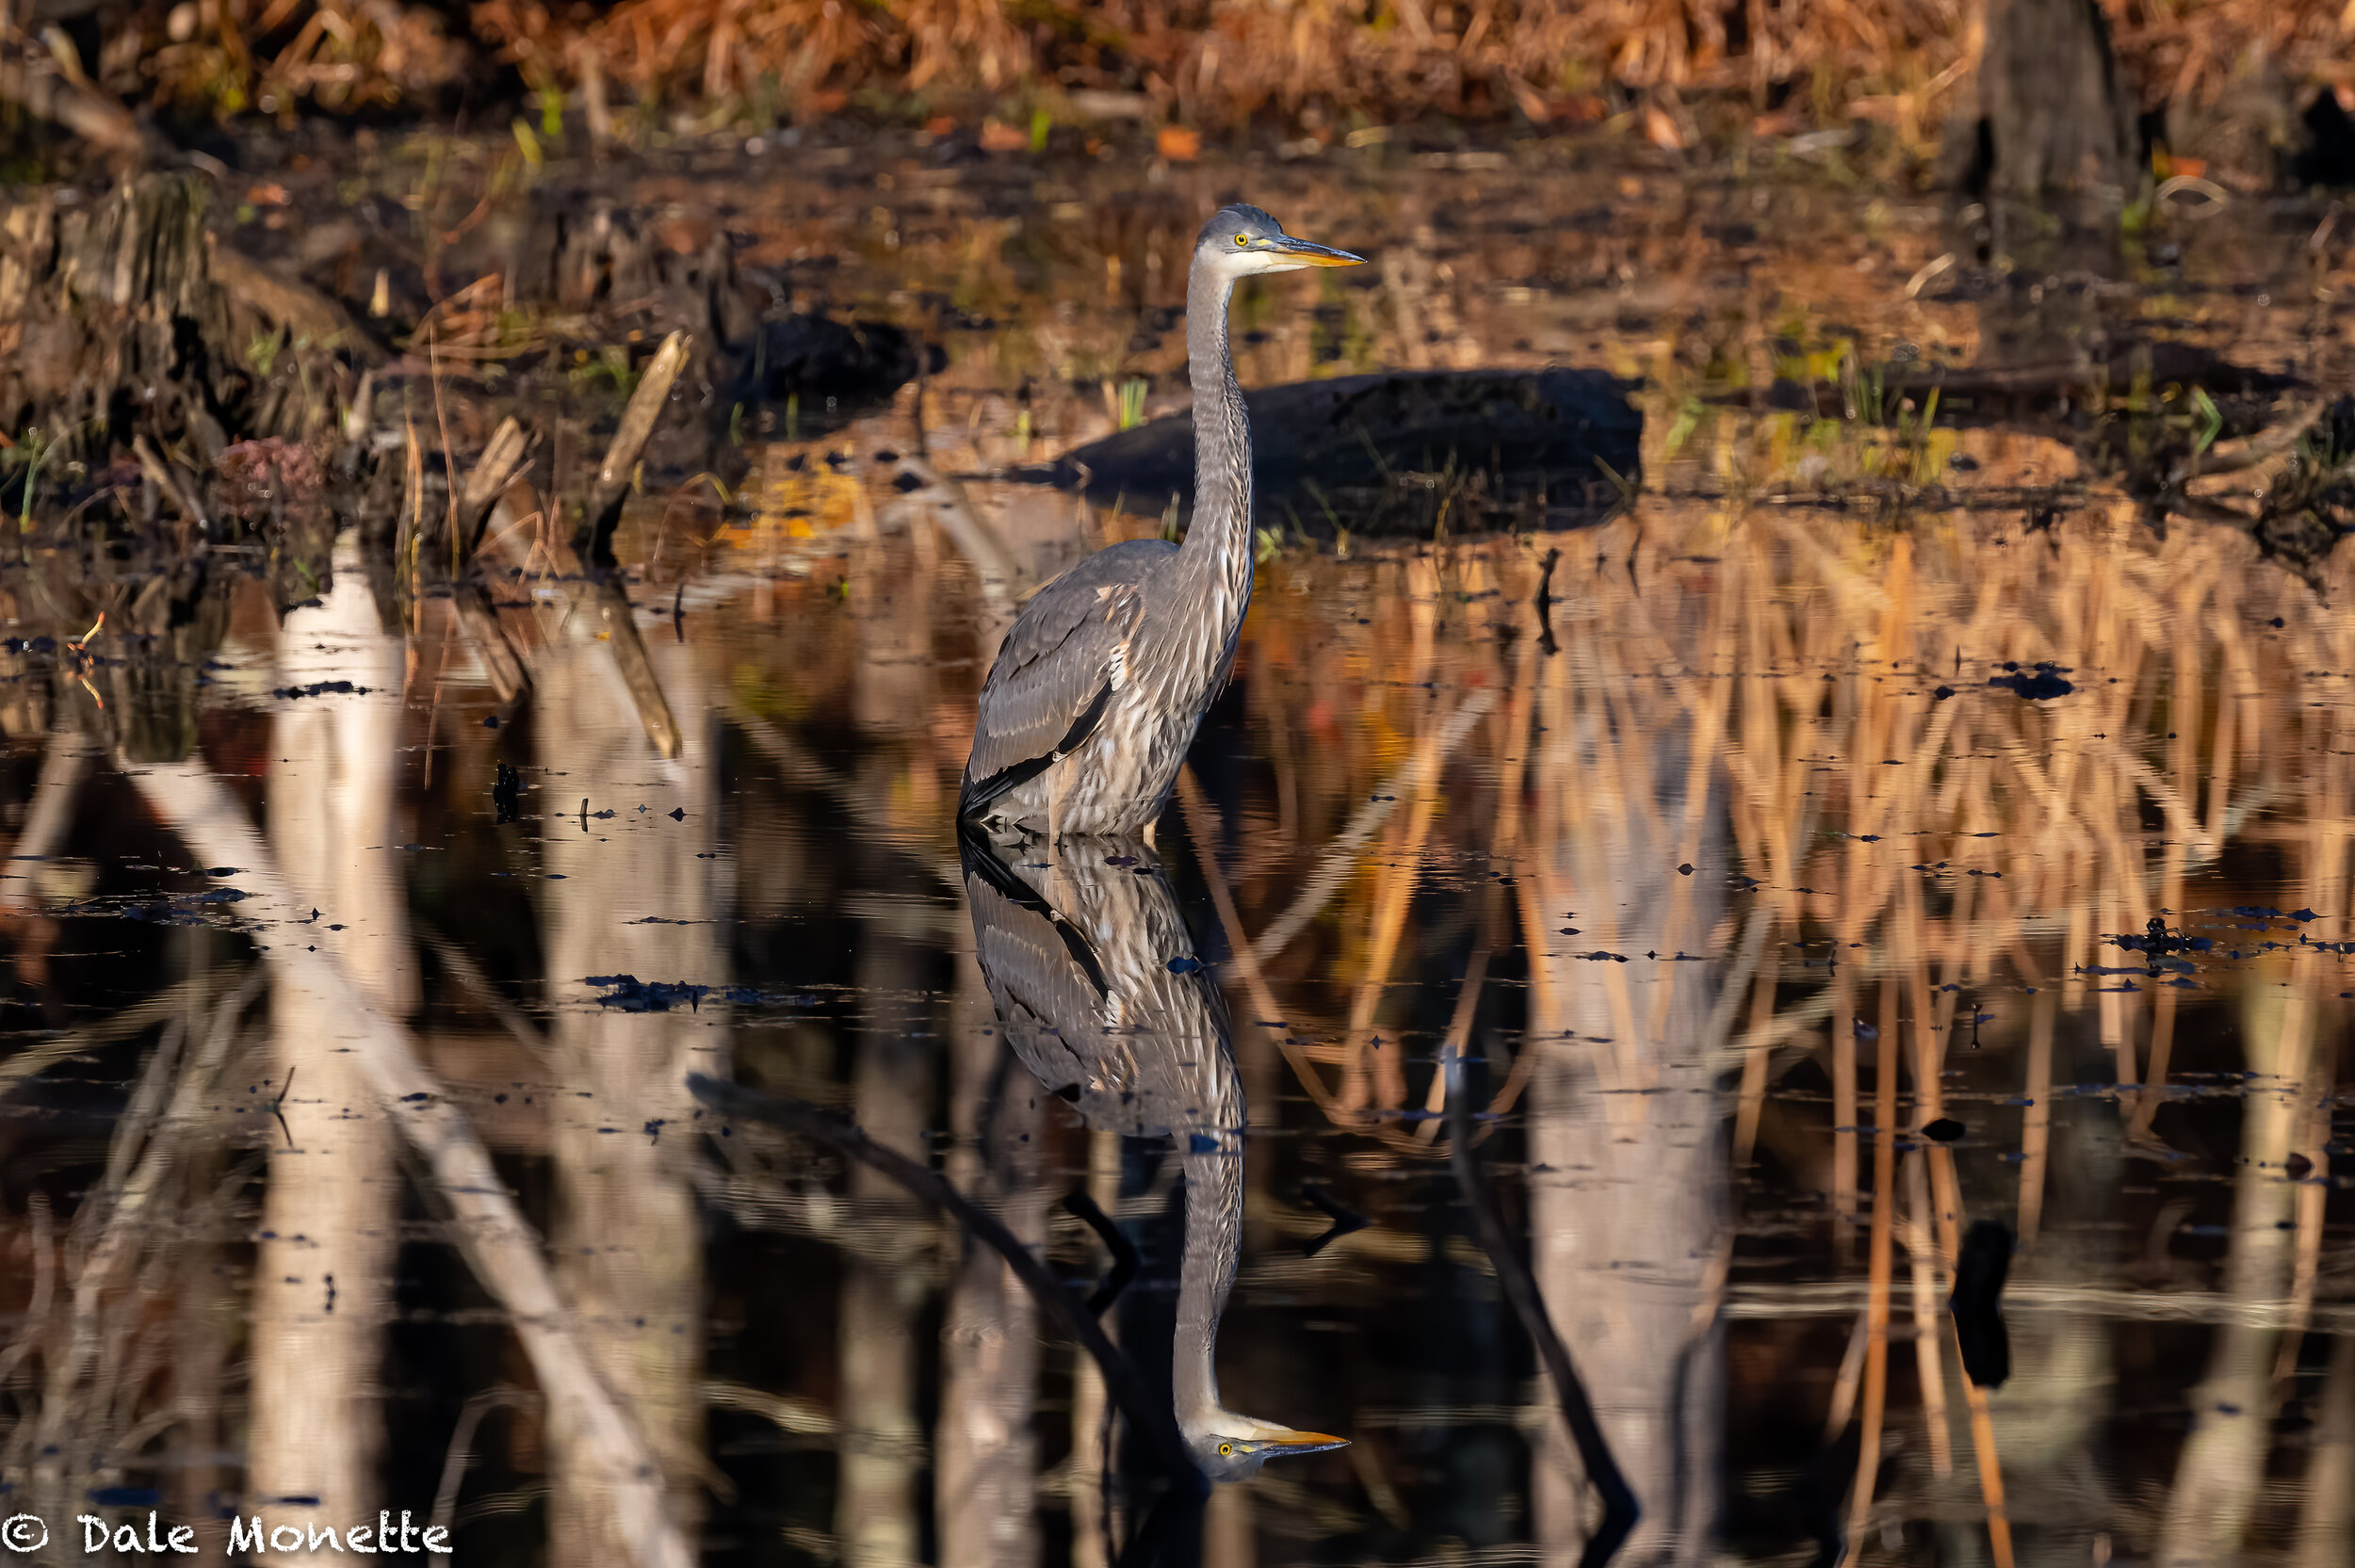   I was surprised to. see this young great blue heron still hanging around this pond.  He’s been here most off the summer and should be heading south soon.  